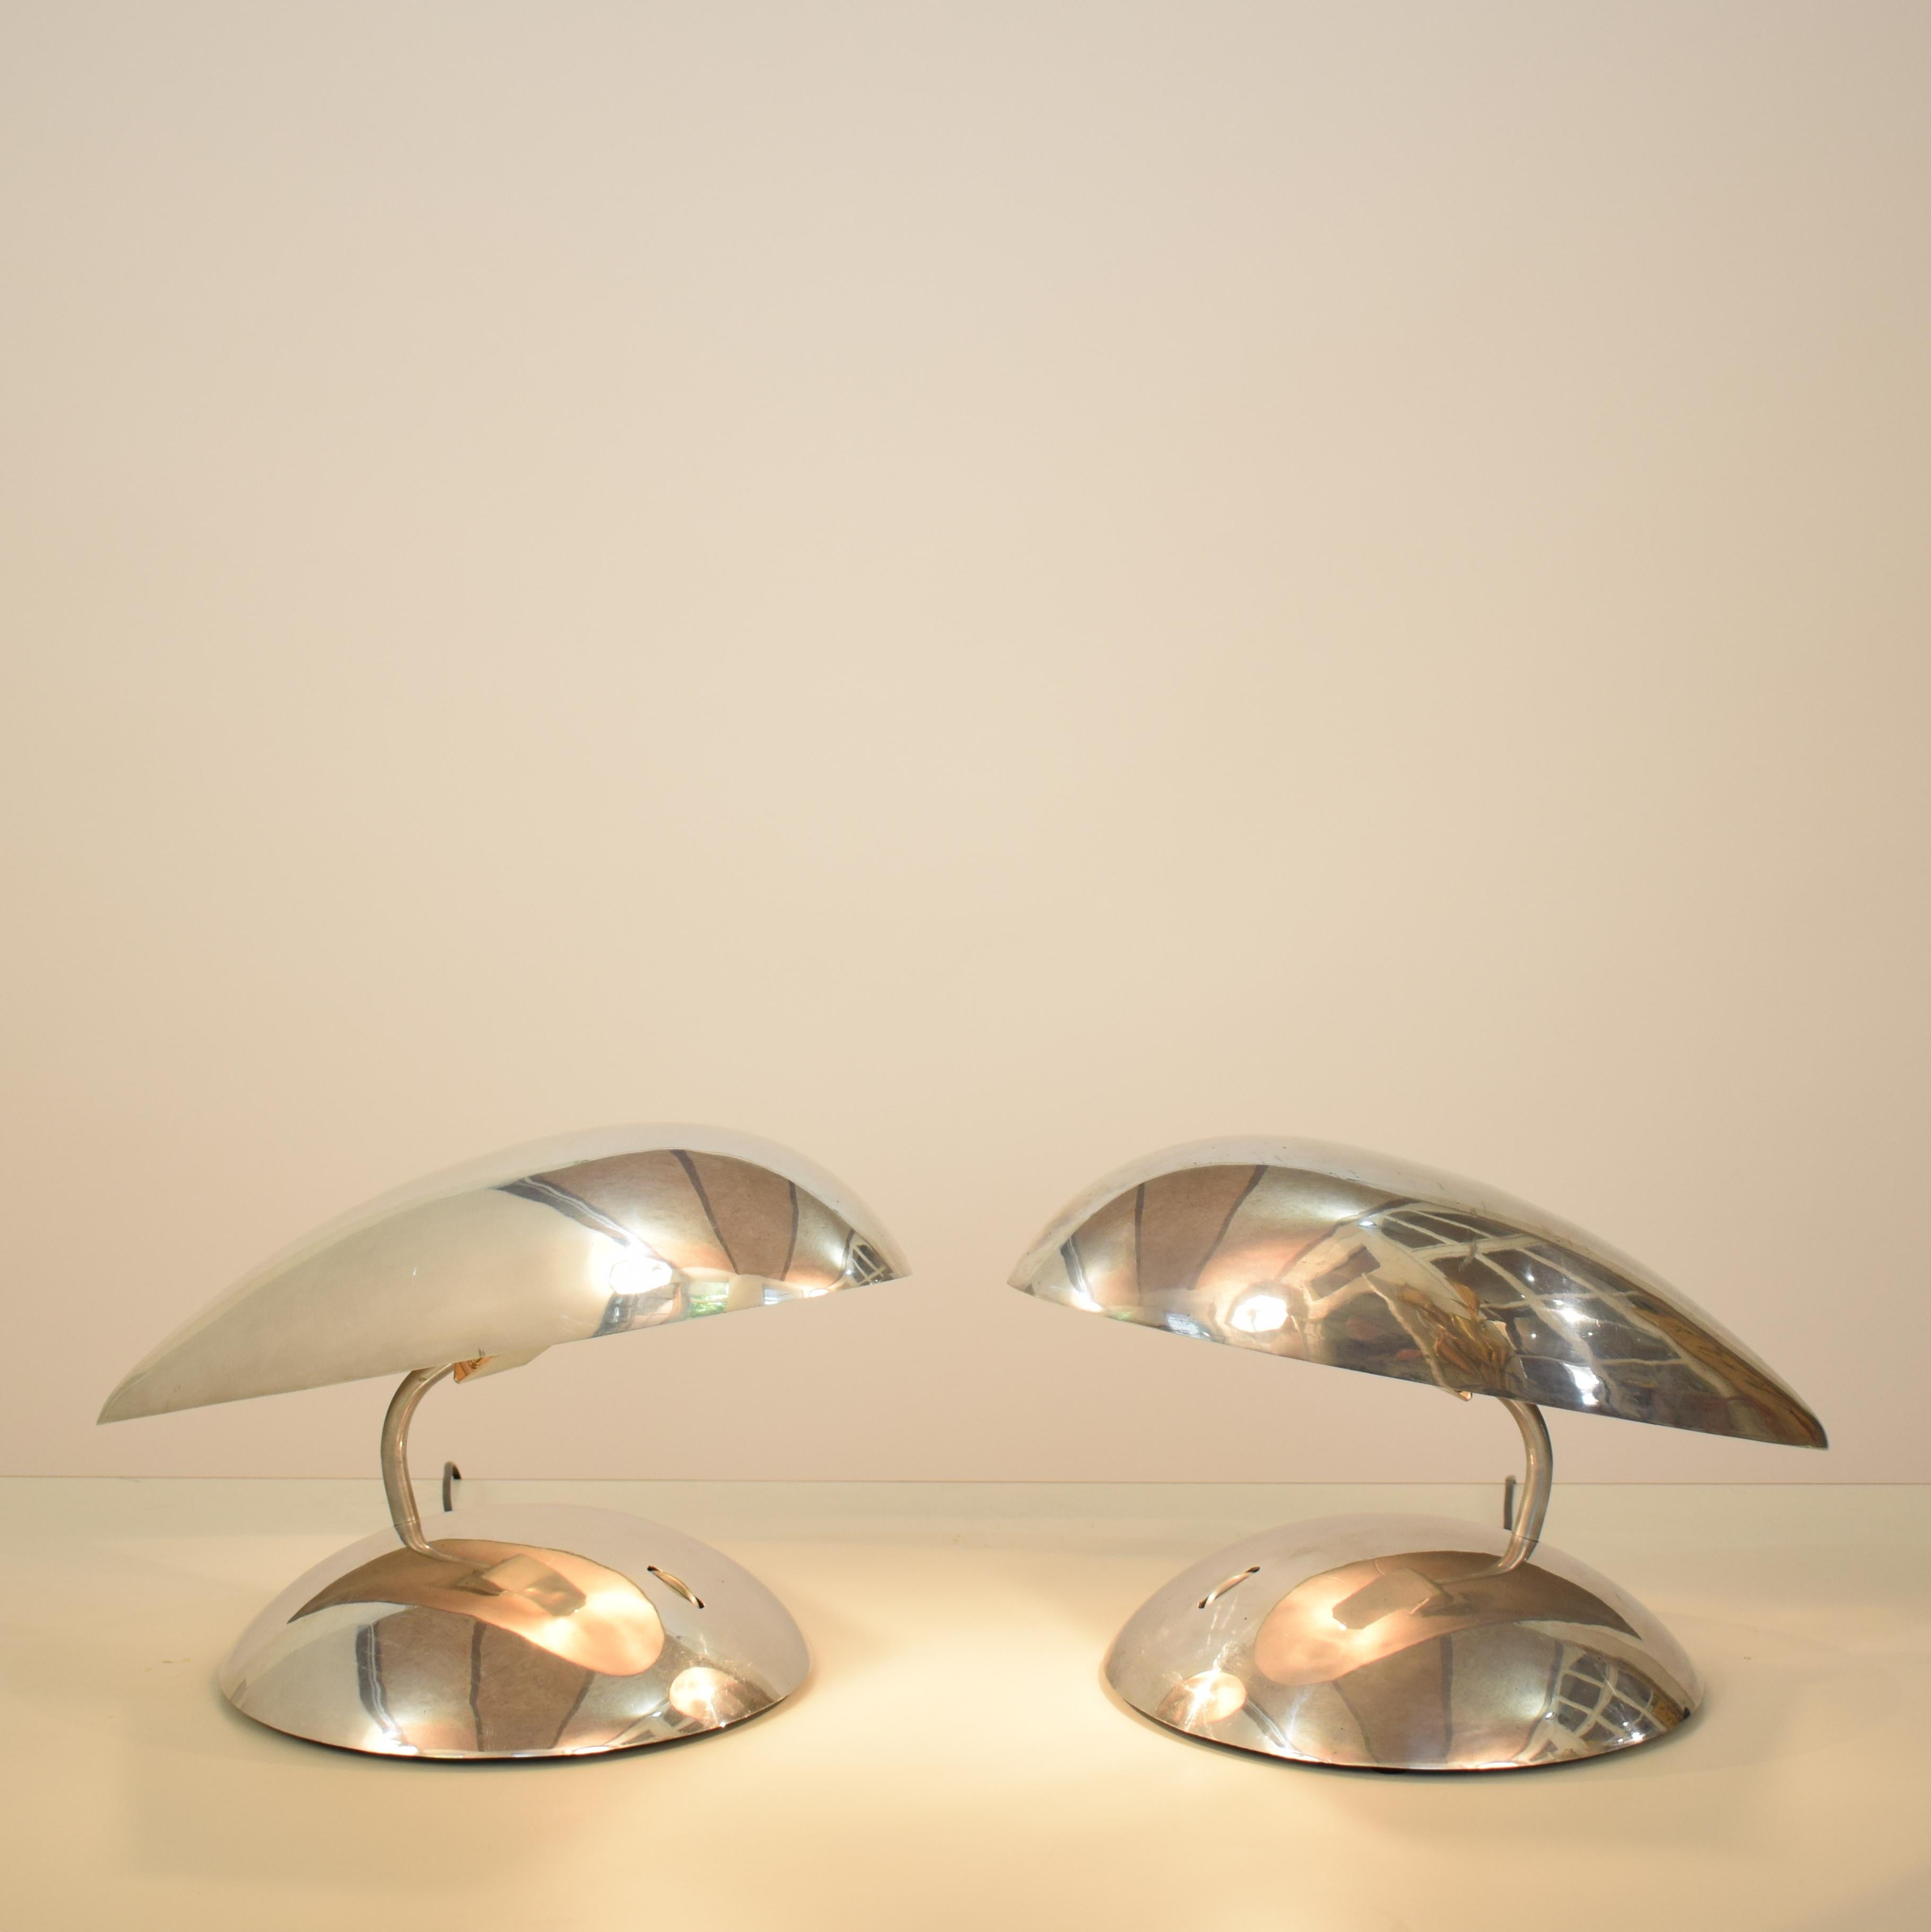 Pair of Polished Aluminium Space Age / Mid Century Table Lamps from the 1980s For Sale 2